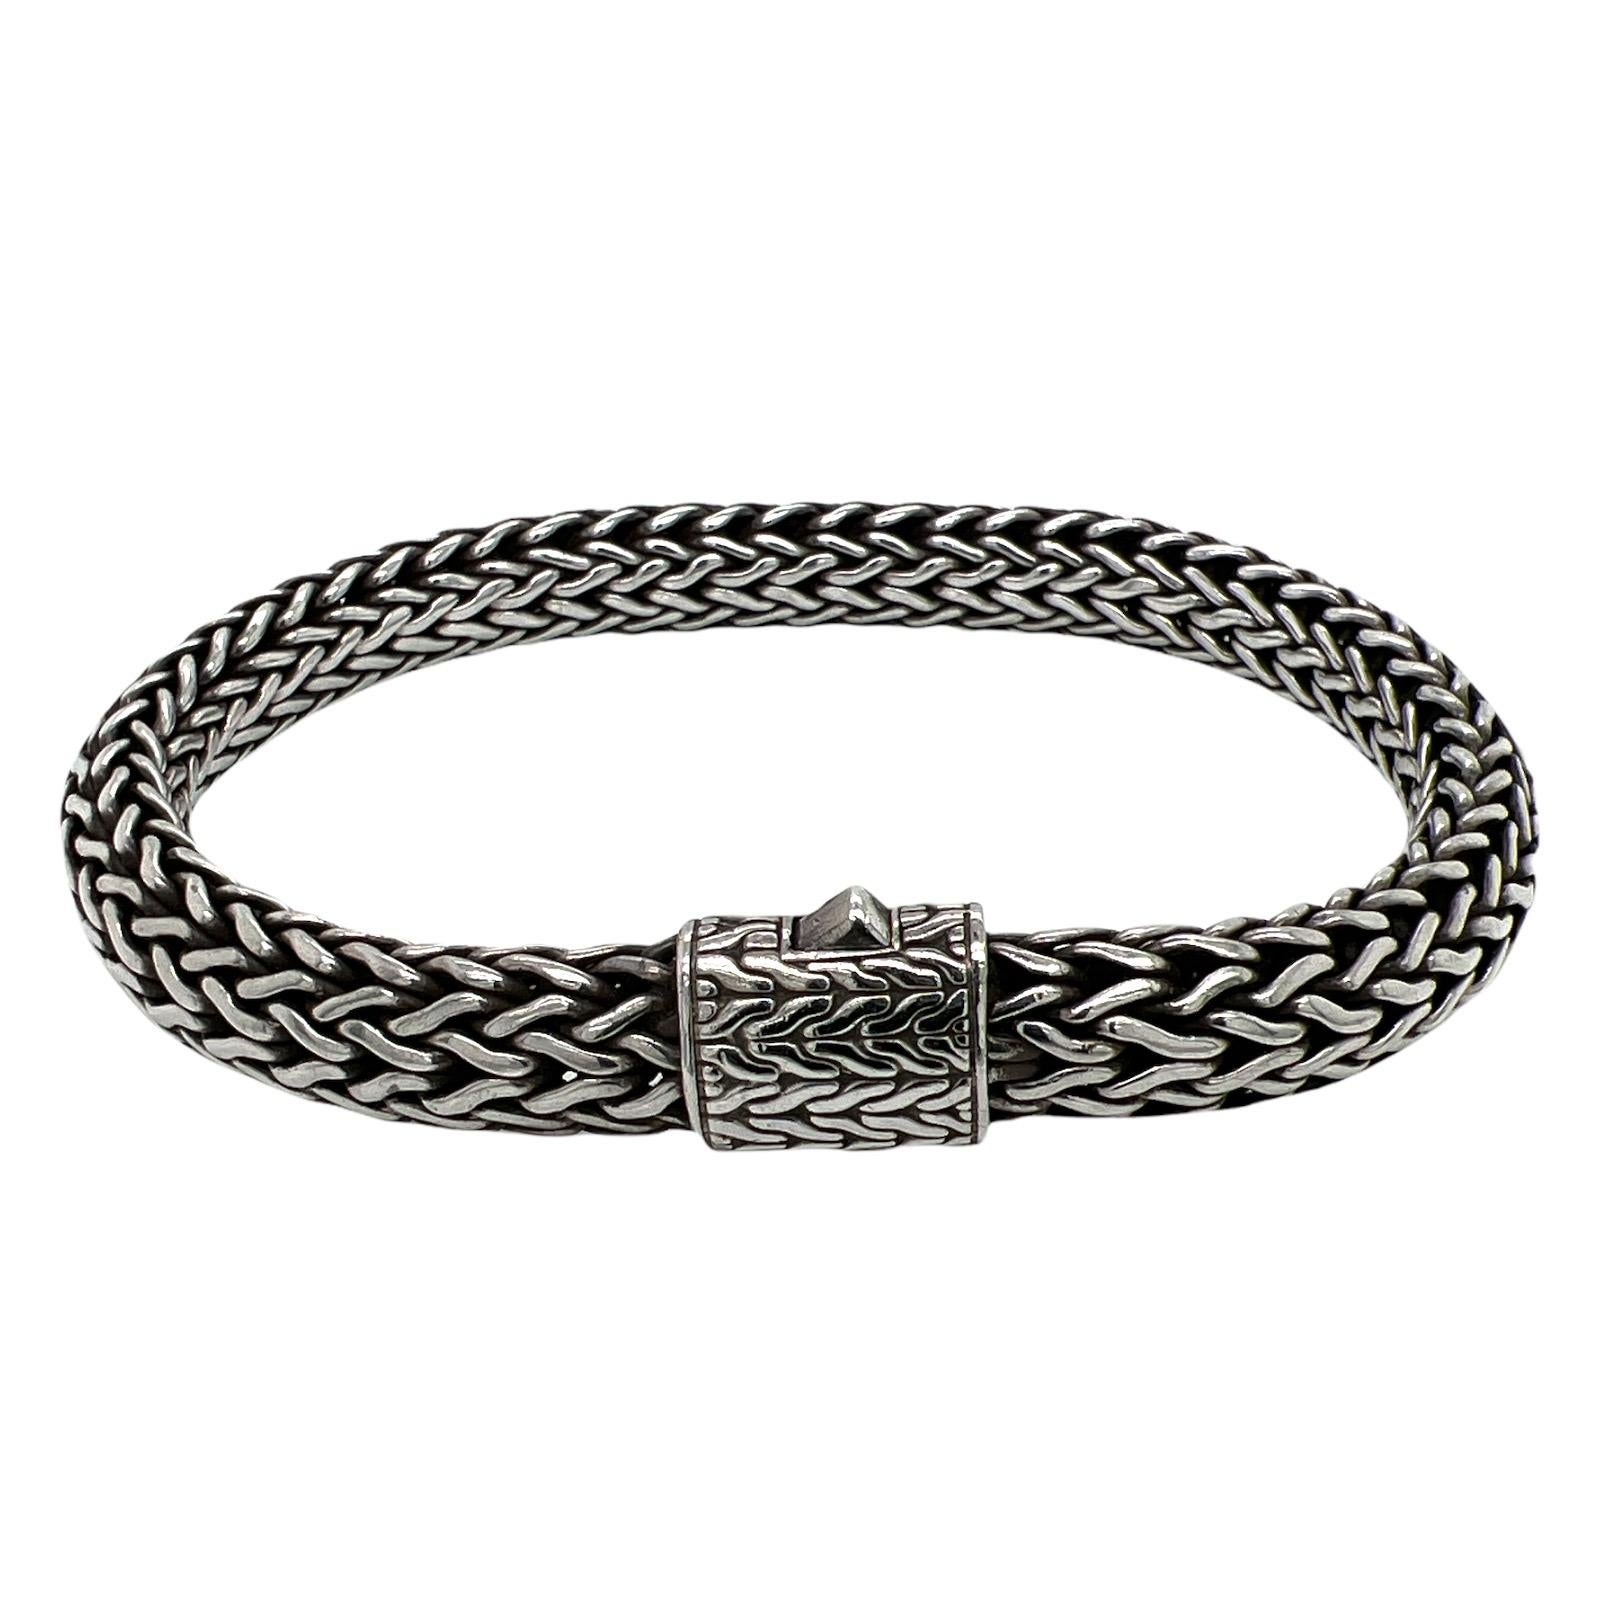 John Hardy Classic Chain bracelet fashioned in sterling silver. The bracelet measures 11mm in width, and 9 inches in length. Signed JH 925. 
MSRP: $1,075.00